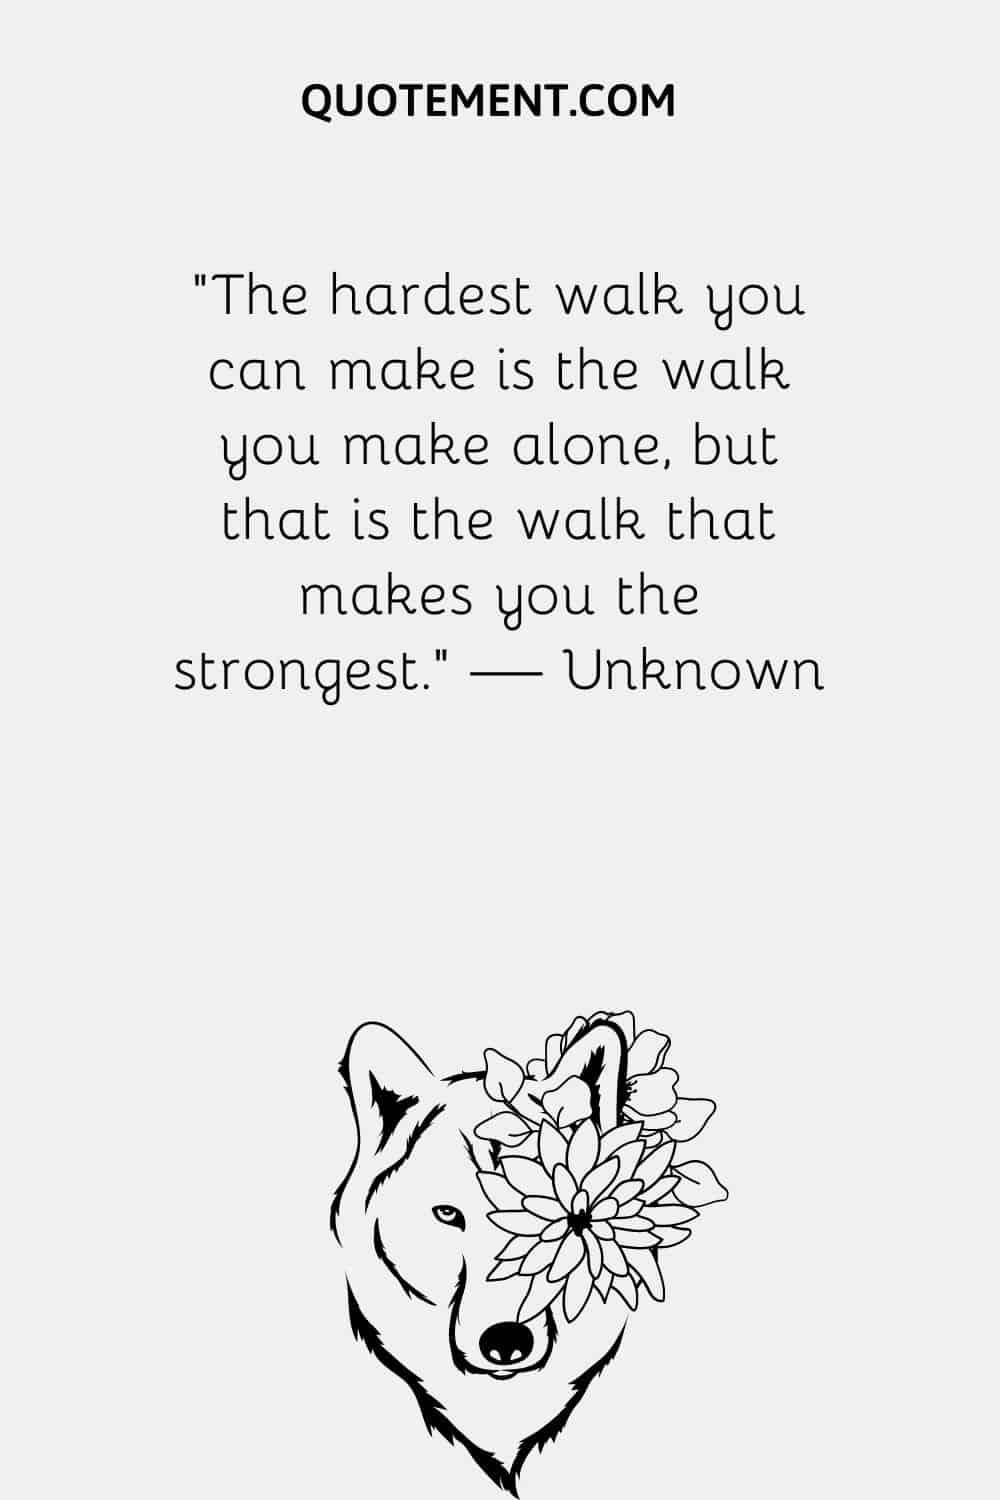 The hardest walk you can make is the walk you make alone